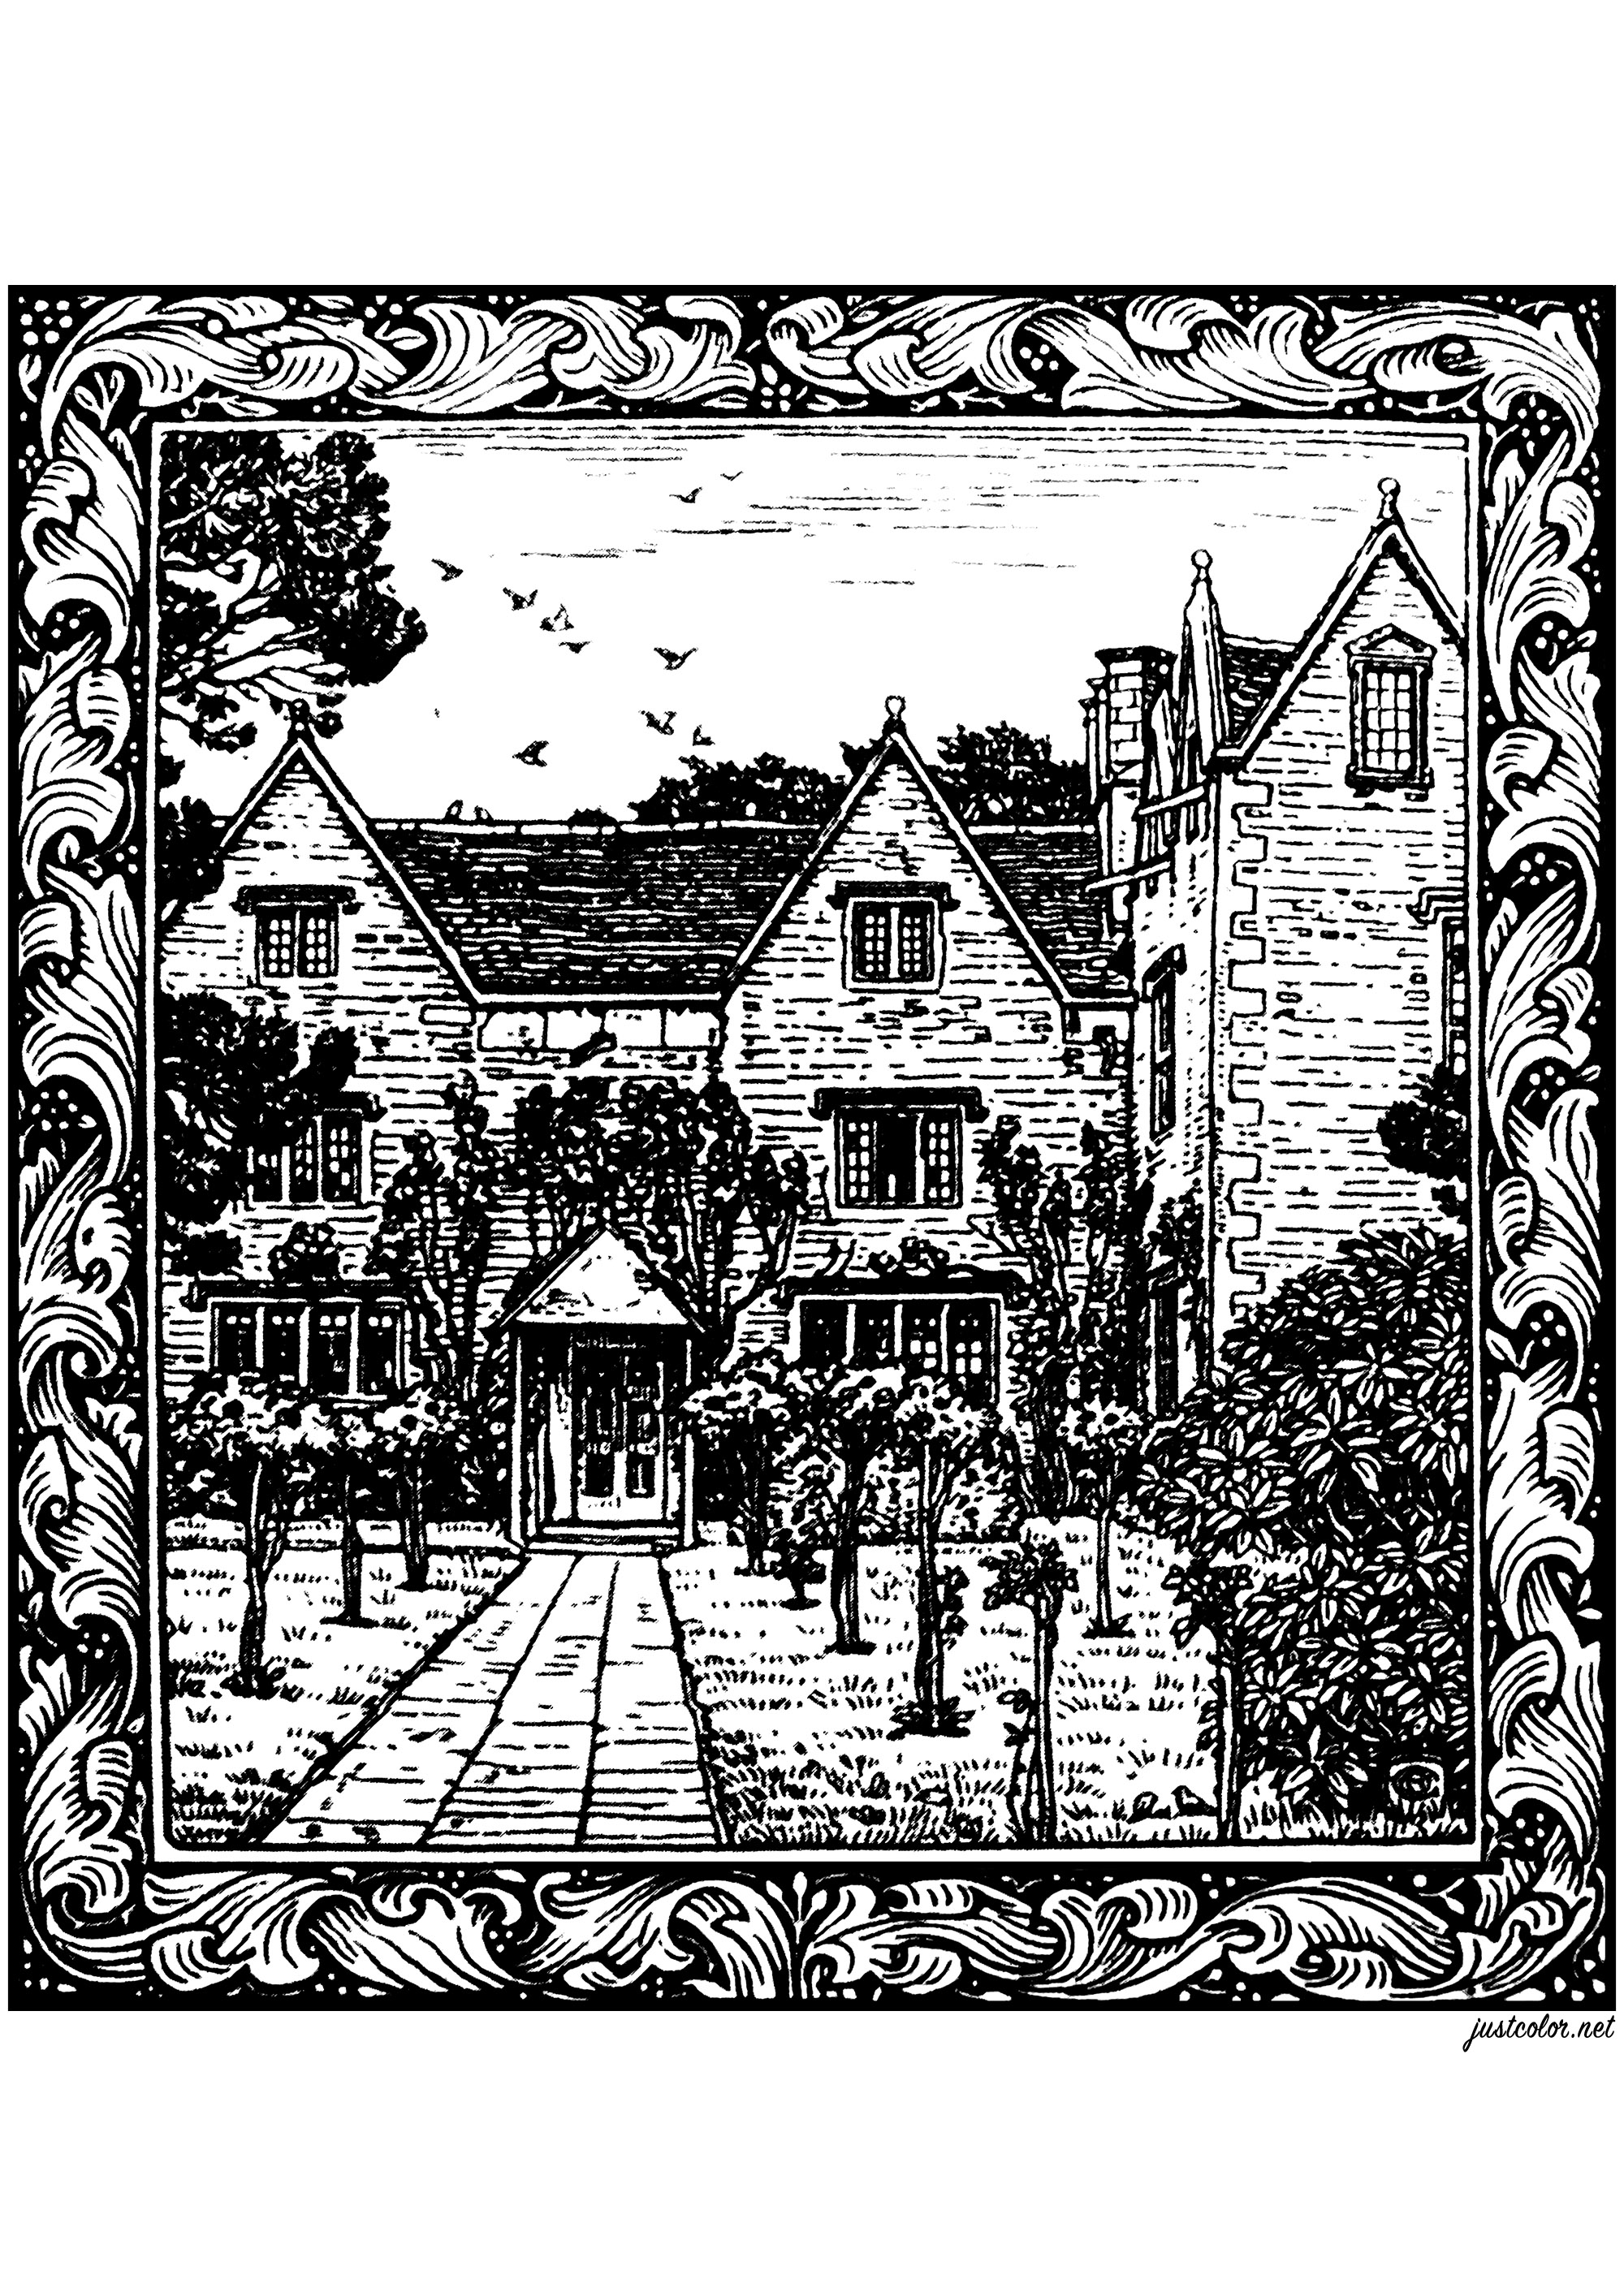 Illustration representing the 'Red House' by William Morris. The Red House is a country house designed in 1859 by the architect Philip Webb for the designer and art theorist William Morris. It is situated in Bexleyheath, Kent, England. The Red House was designed to be a functional and comfortable family home, but it also reflects the aesthetic ideals of Morris and his friends about the importance of craftsmanship and beauty in the everyday environment. The house is also famous for its interior, which was designed by Morris himself and includes paintings, wallpaper and printed fabrics produced by his own company.